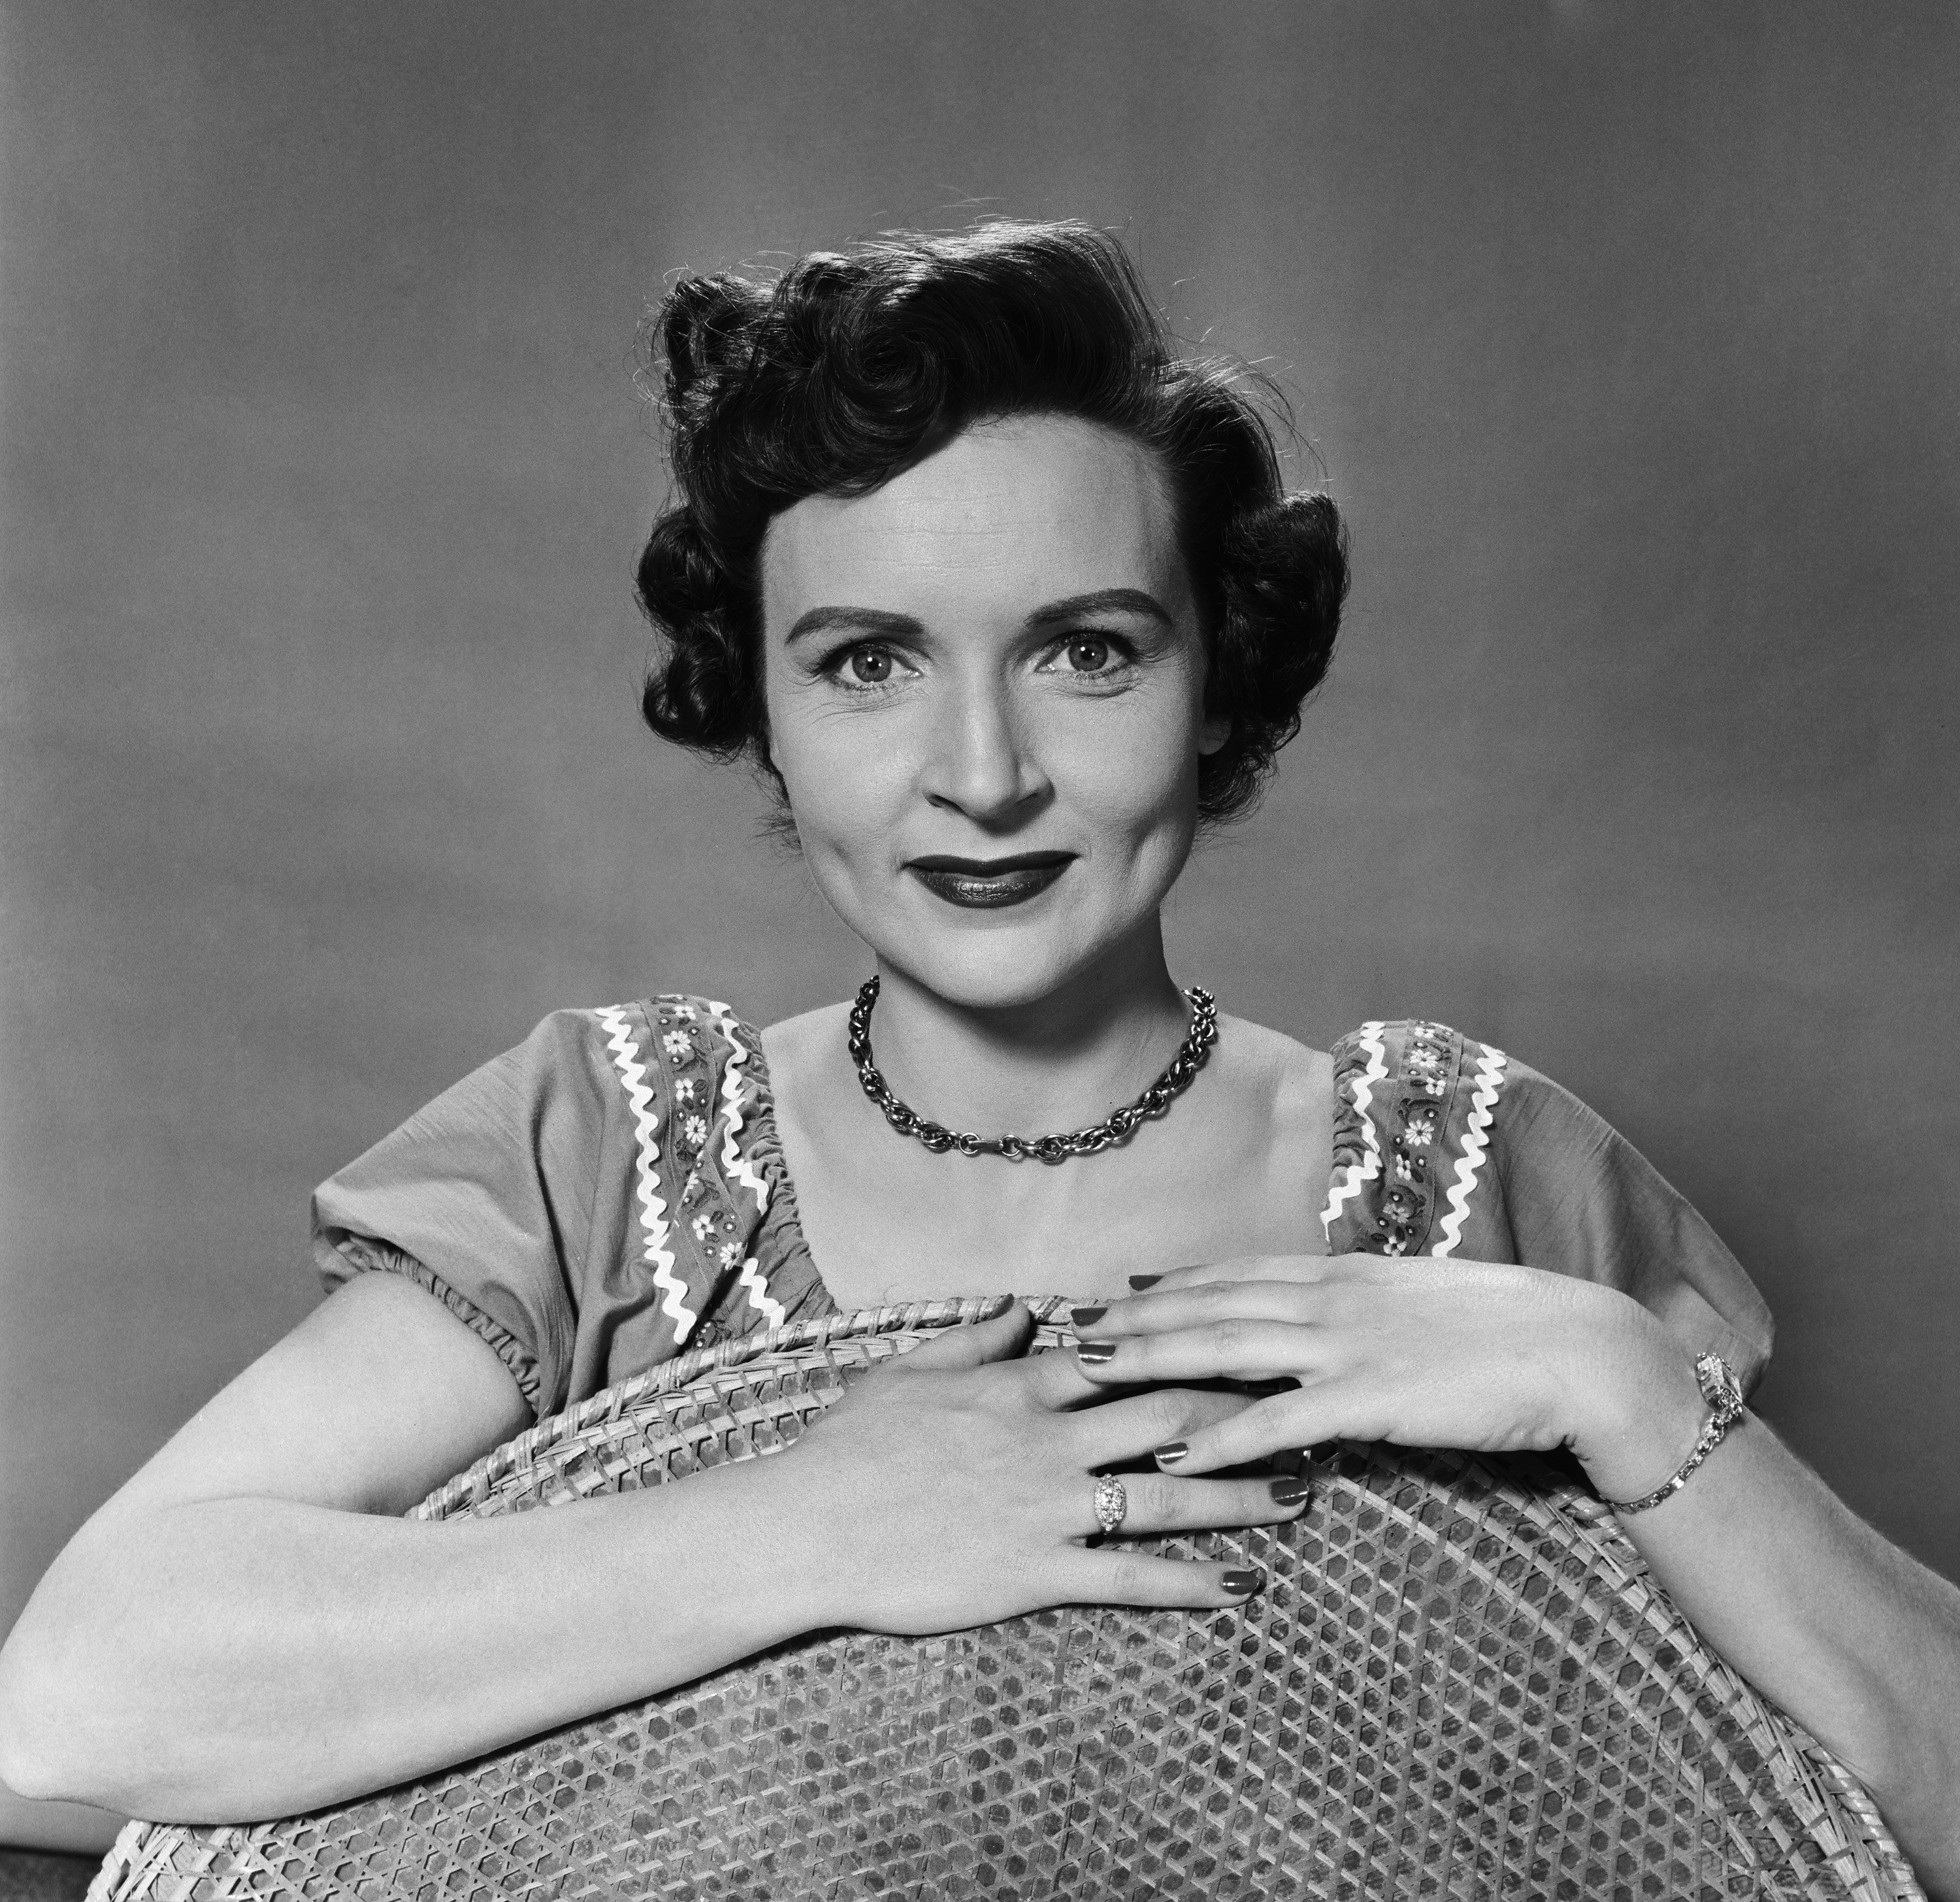 Betty White poses while holding the back of a wicker chair